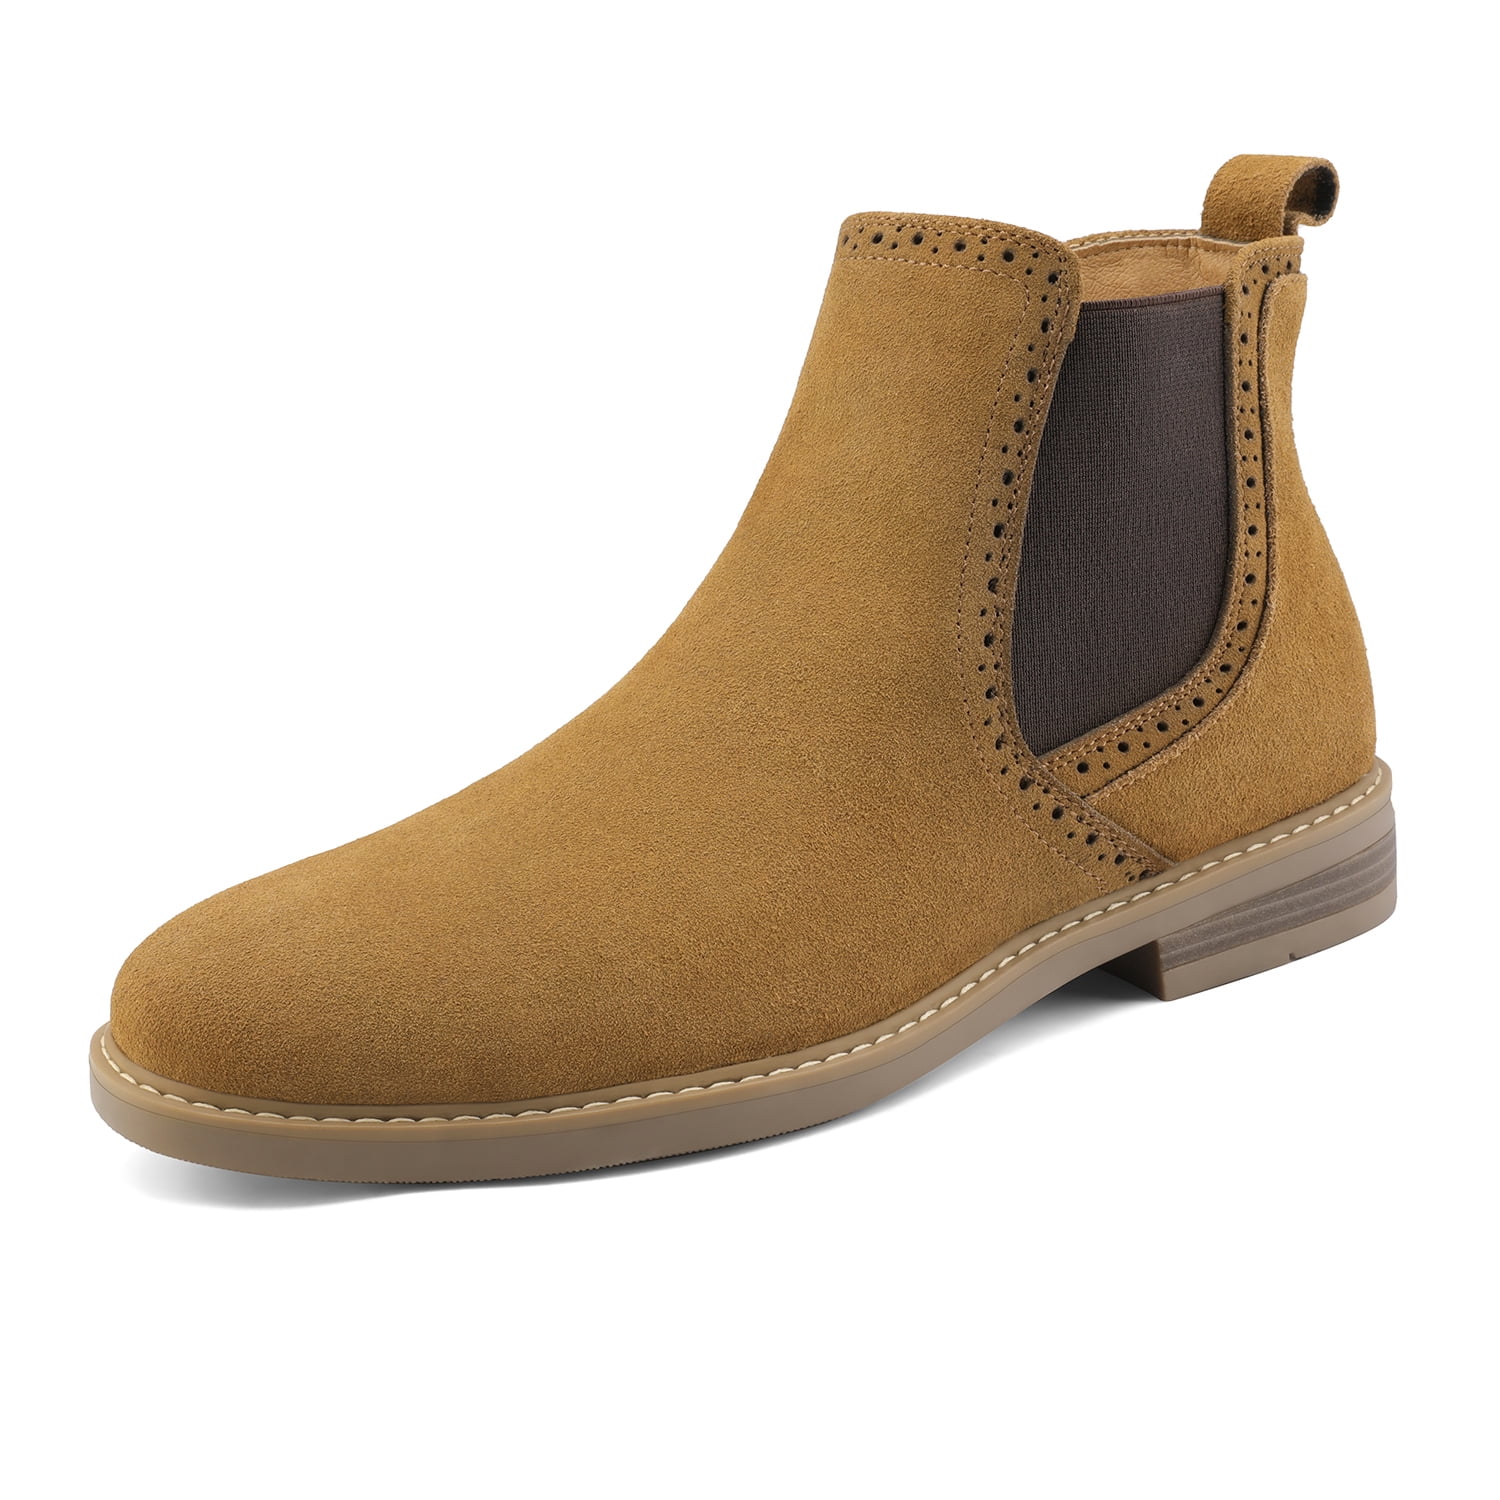 New Men's Beach Feet Suede Ankle Boots Winter Tan  2A 